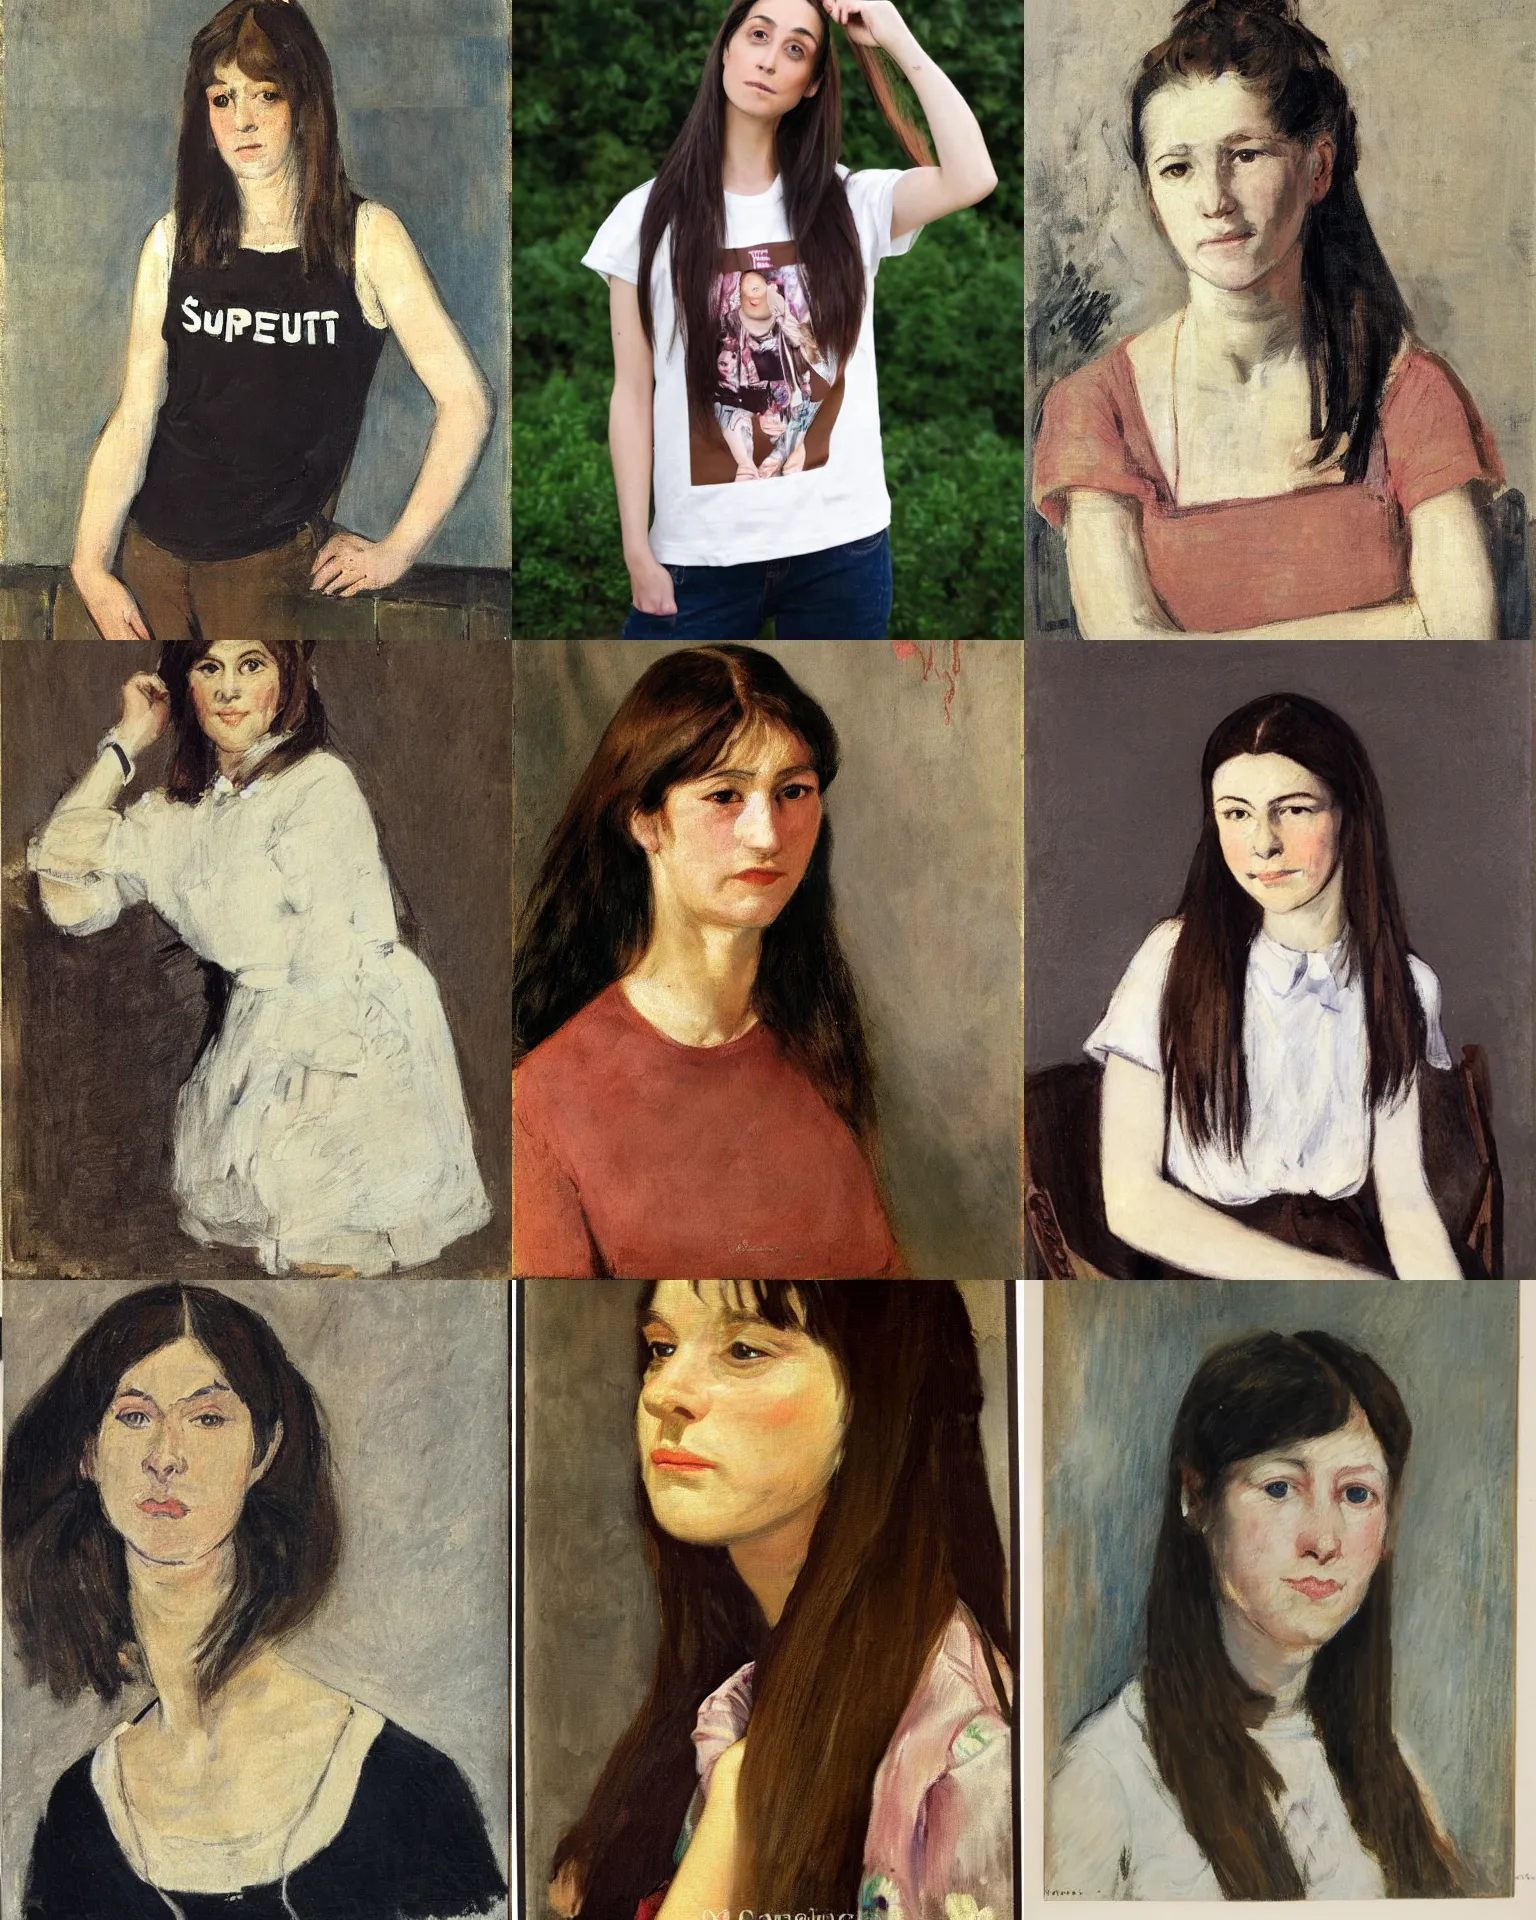 Prompt: a portrait of a woman by mary cassat. she has long straight dark brown hair, parted in the middle. she has large dark brown eyes, a small refined nose, and thin lips. she is wearing a t - shirt with the supreme brand logo on it, a sleeveless white blouse, a pair of dark brown capris, and black loafers.